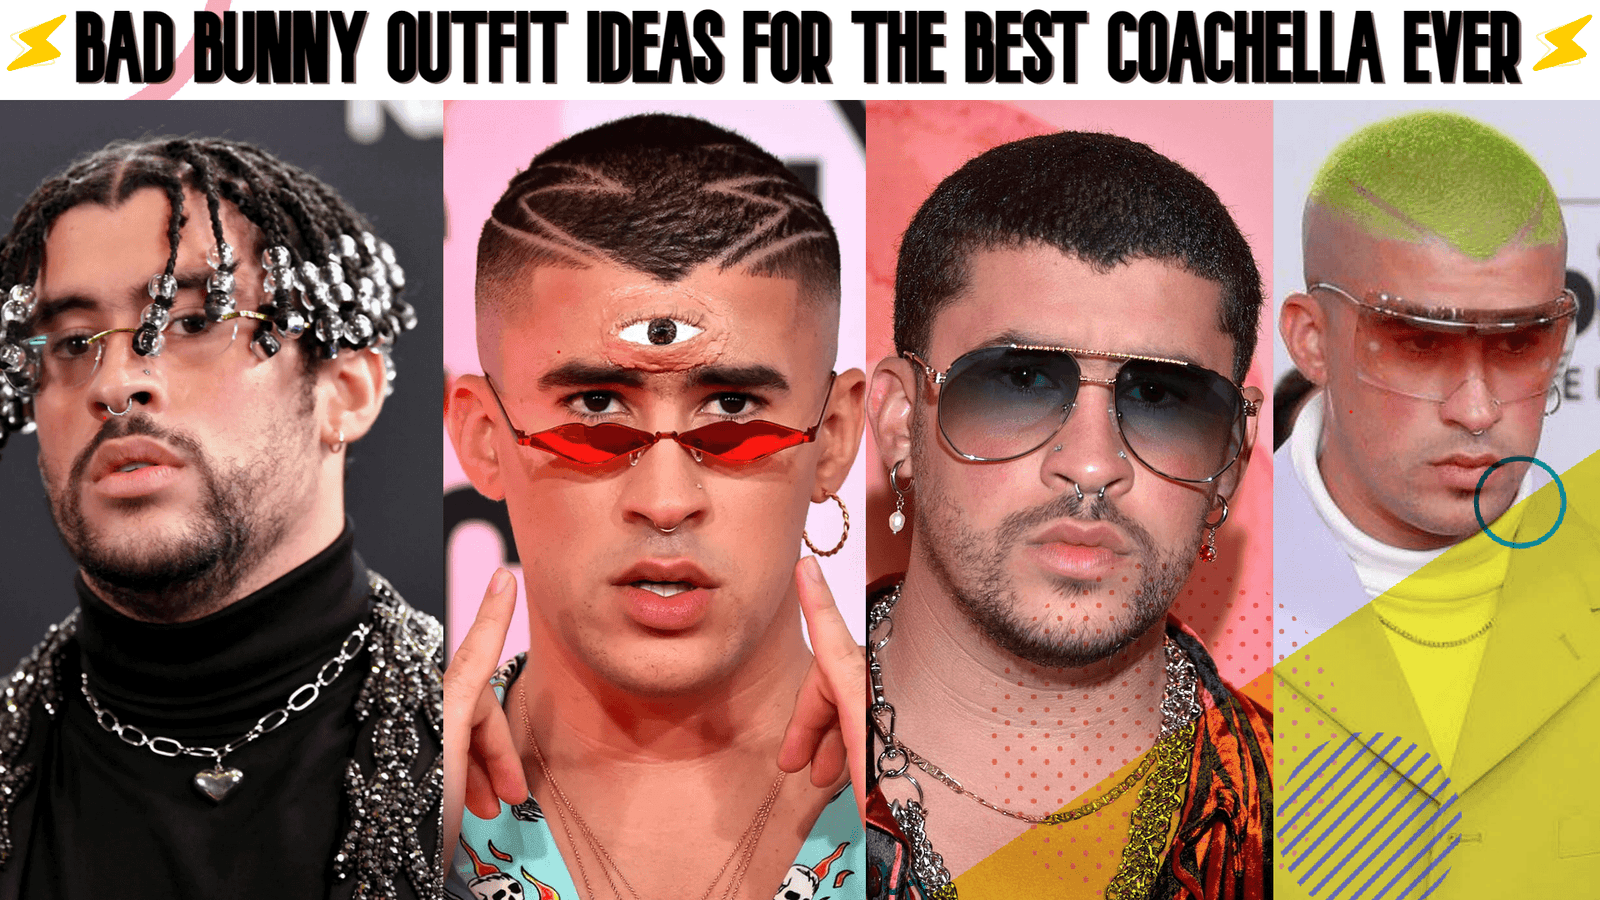 Easy Bad Bunny Inspired Outfit Ideas for the Best Coachella Ever